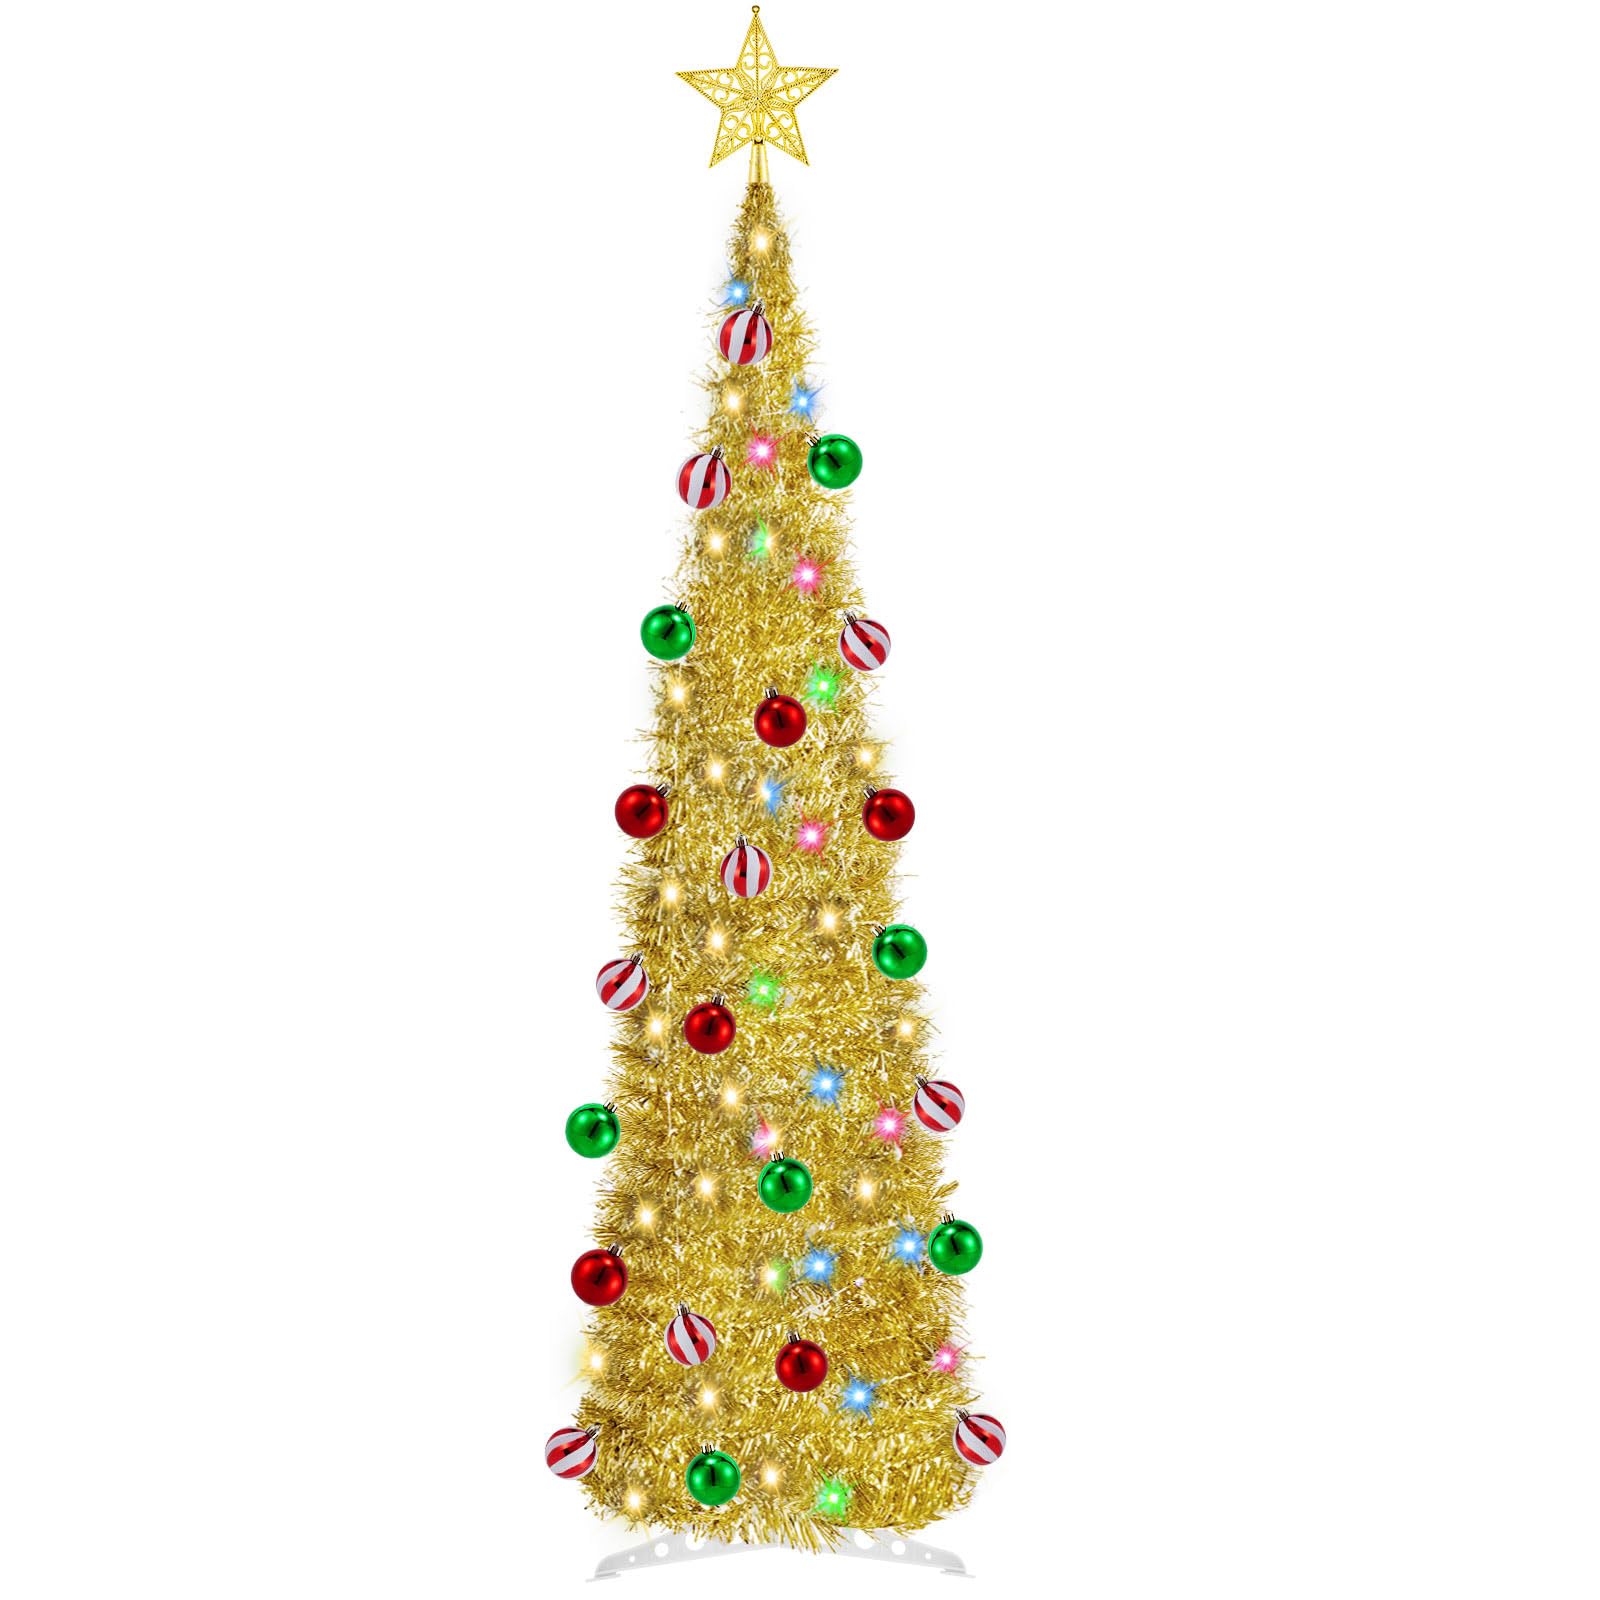 COUAH 5 Ft Pop Up Christmas Tree with Lights and Decorations